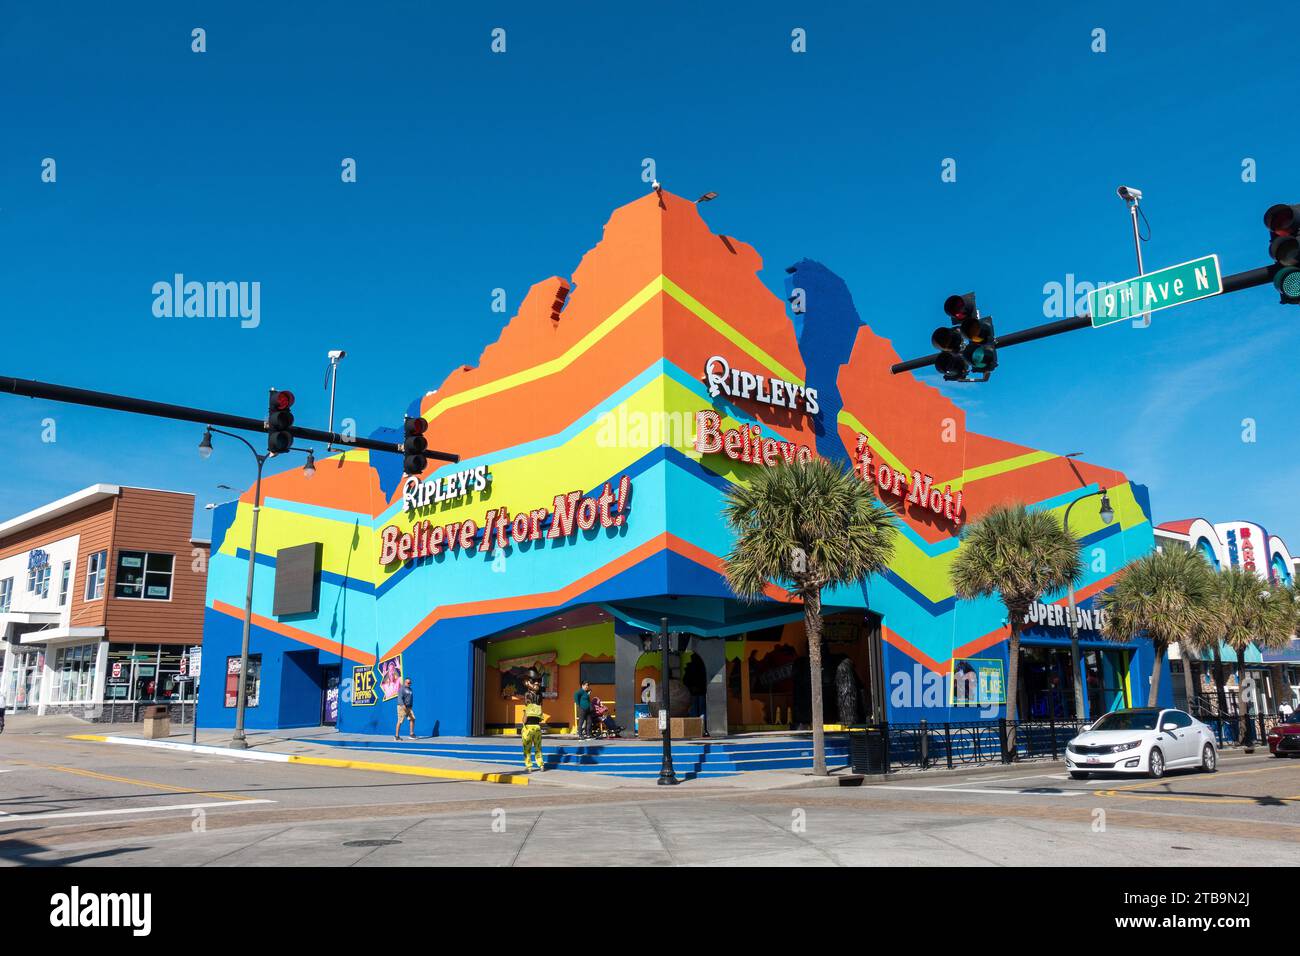 Ripley's Believe IT or Not Myrtle Beach Tourist Attraction Building Exterieur 9th Avenue Myrtle Beach, South Carolina, USA Stockfoto